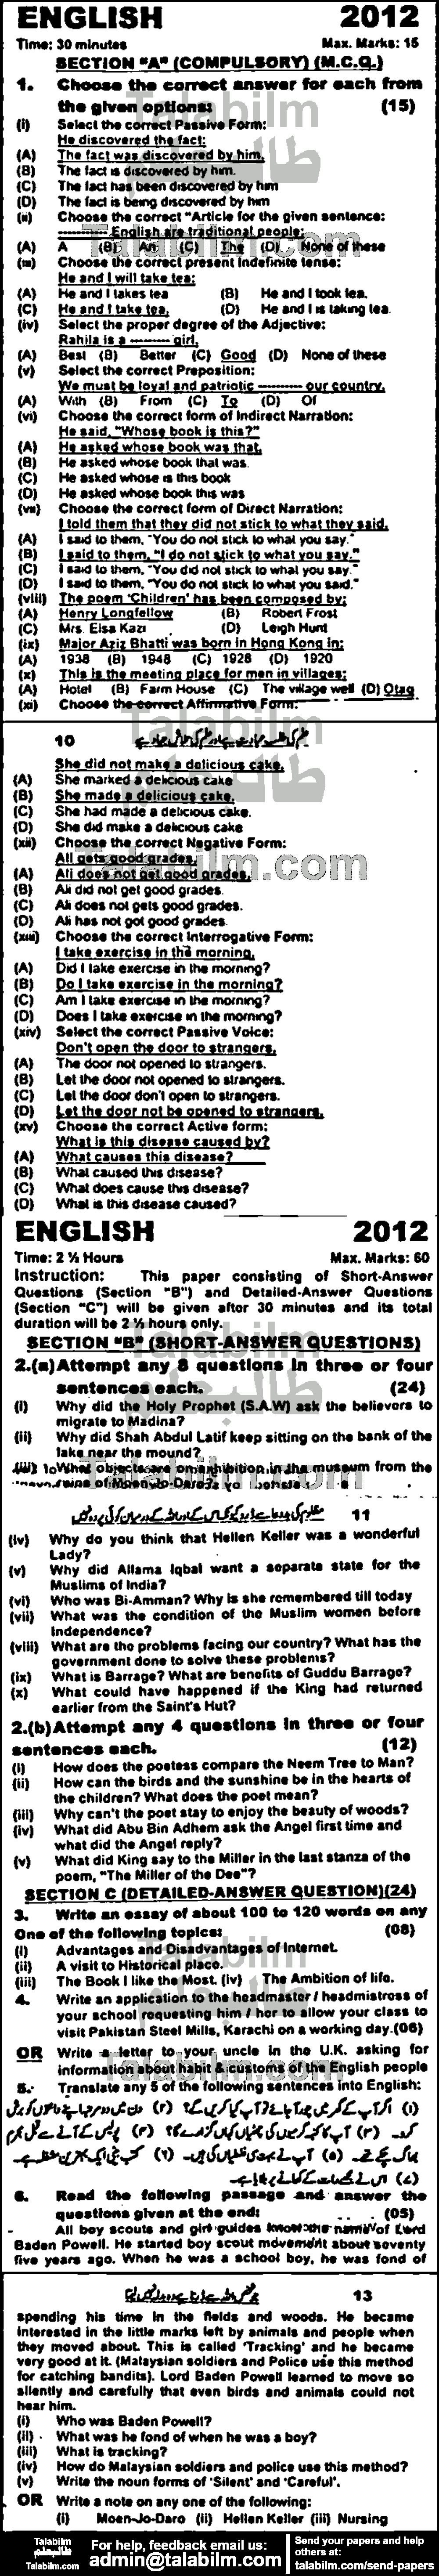 English 0 past paper for 2012 Group-I